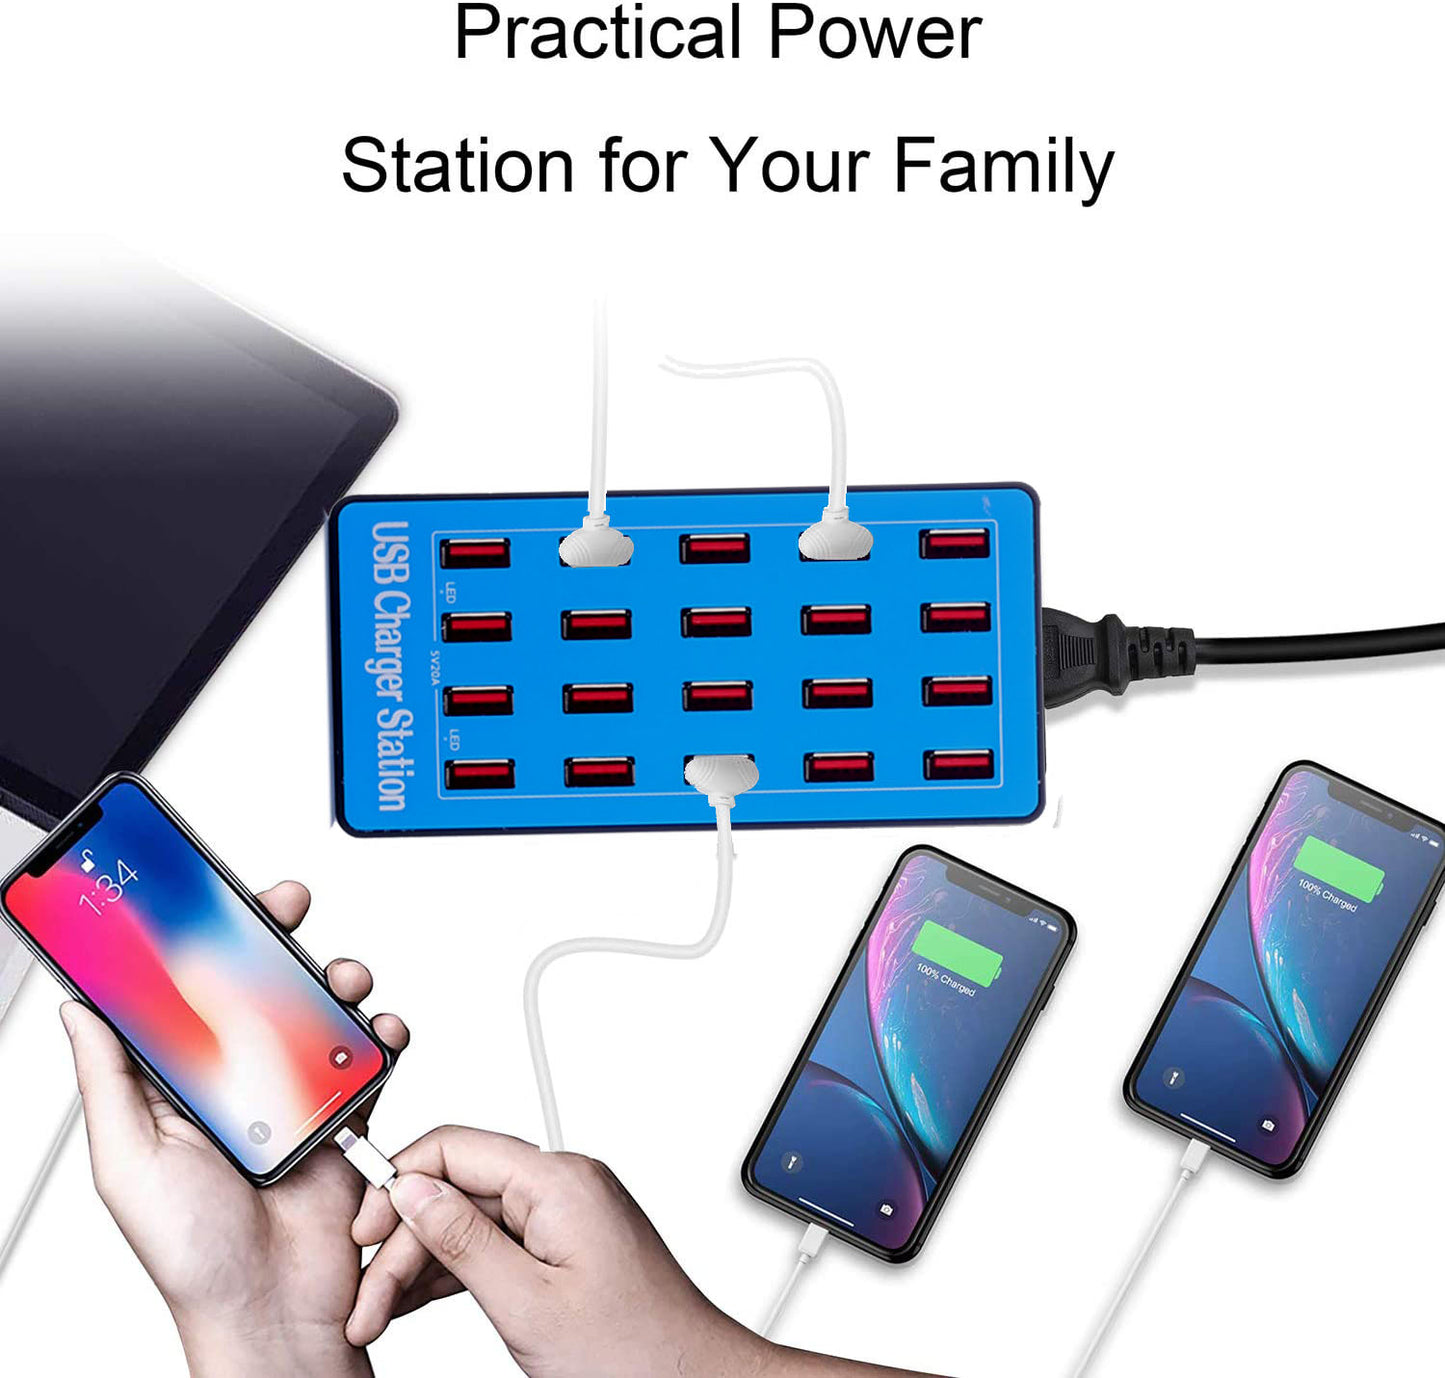 USB Charger Station 20-Port 100W/20A Multiple